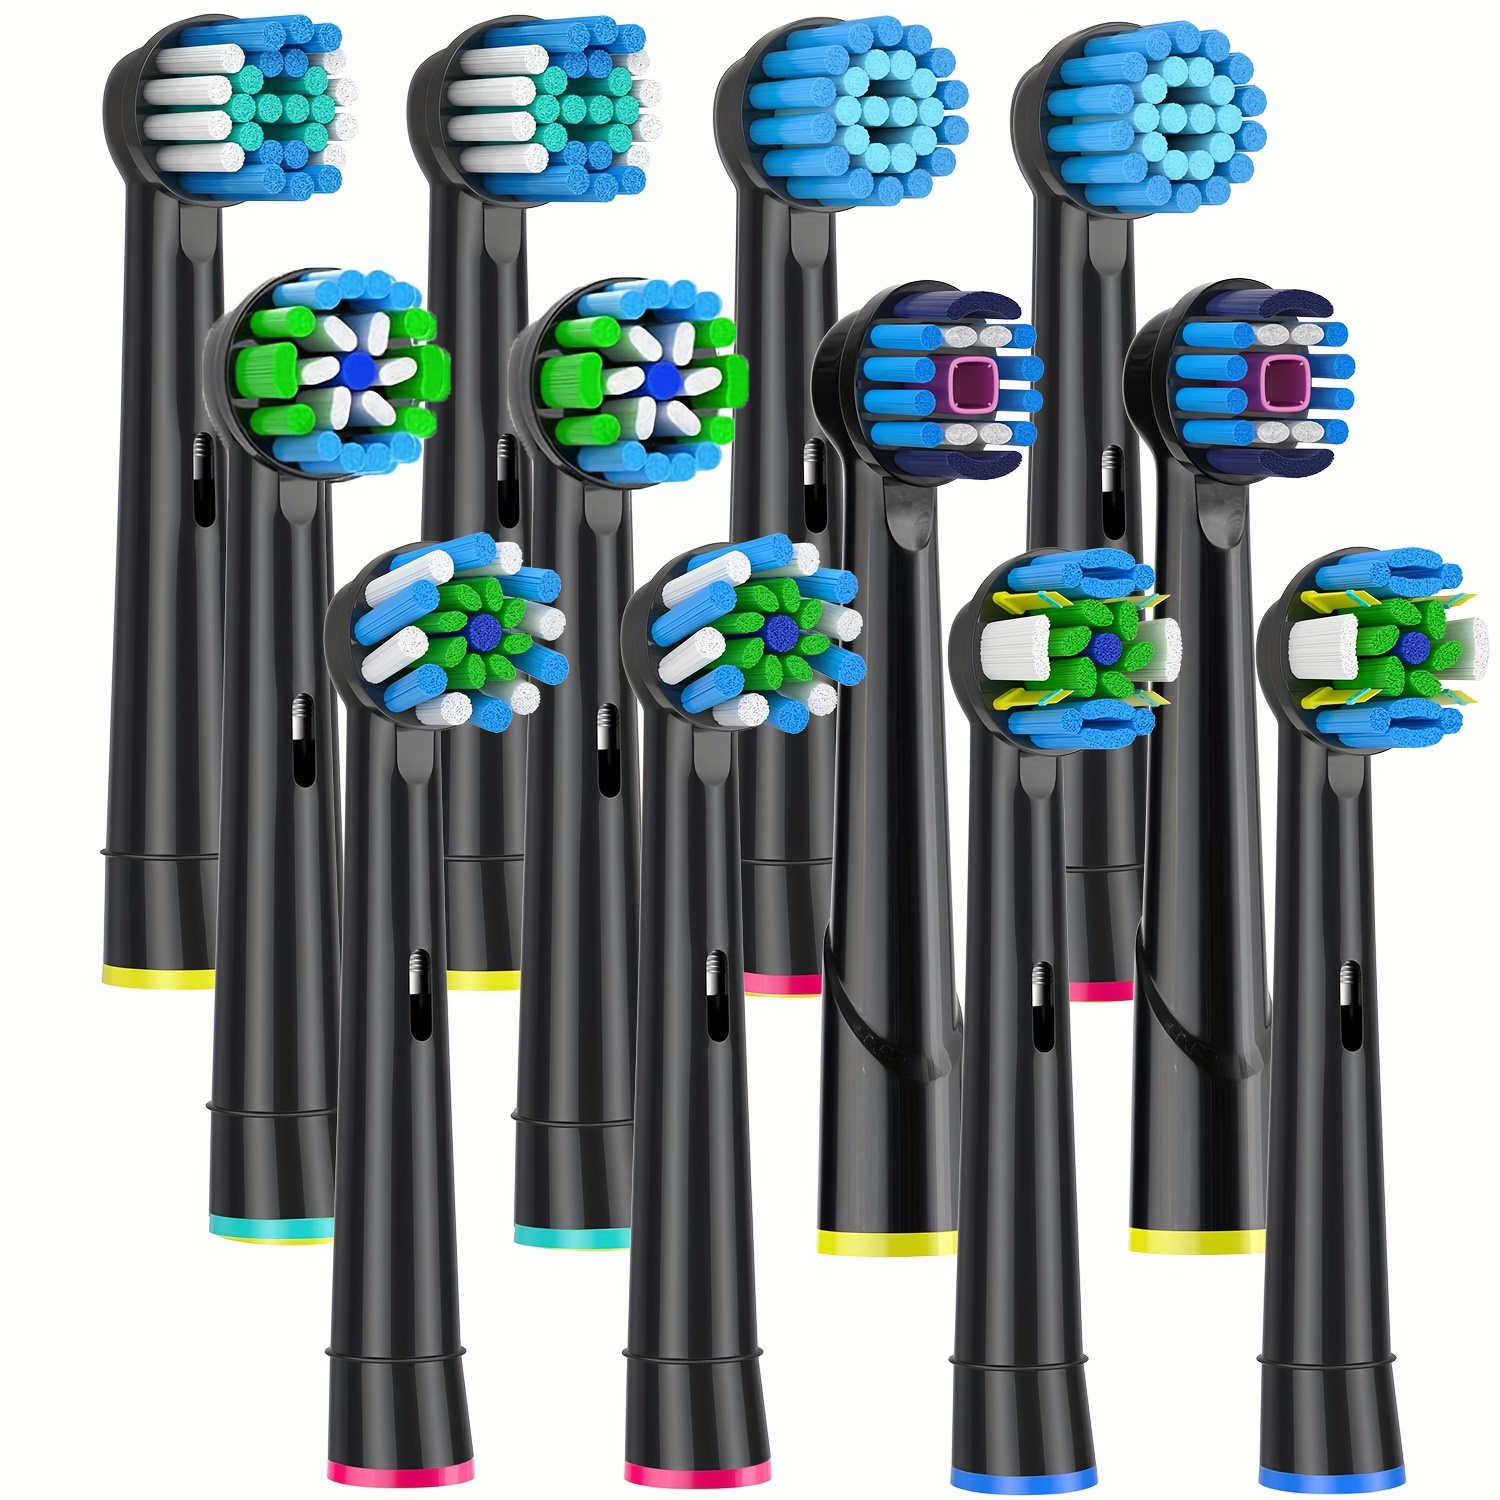 

Toothbrush Head Compatible With Oral B Electric Toothbrush, Including 2 Precision, 2 Cross, 2 Floss, 2 Whitening, 2 Sensitive, 2 Effcient - 12pcs